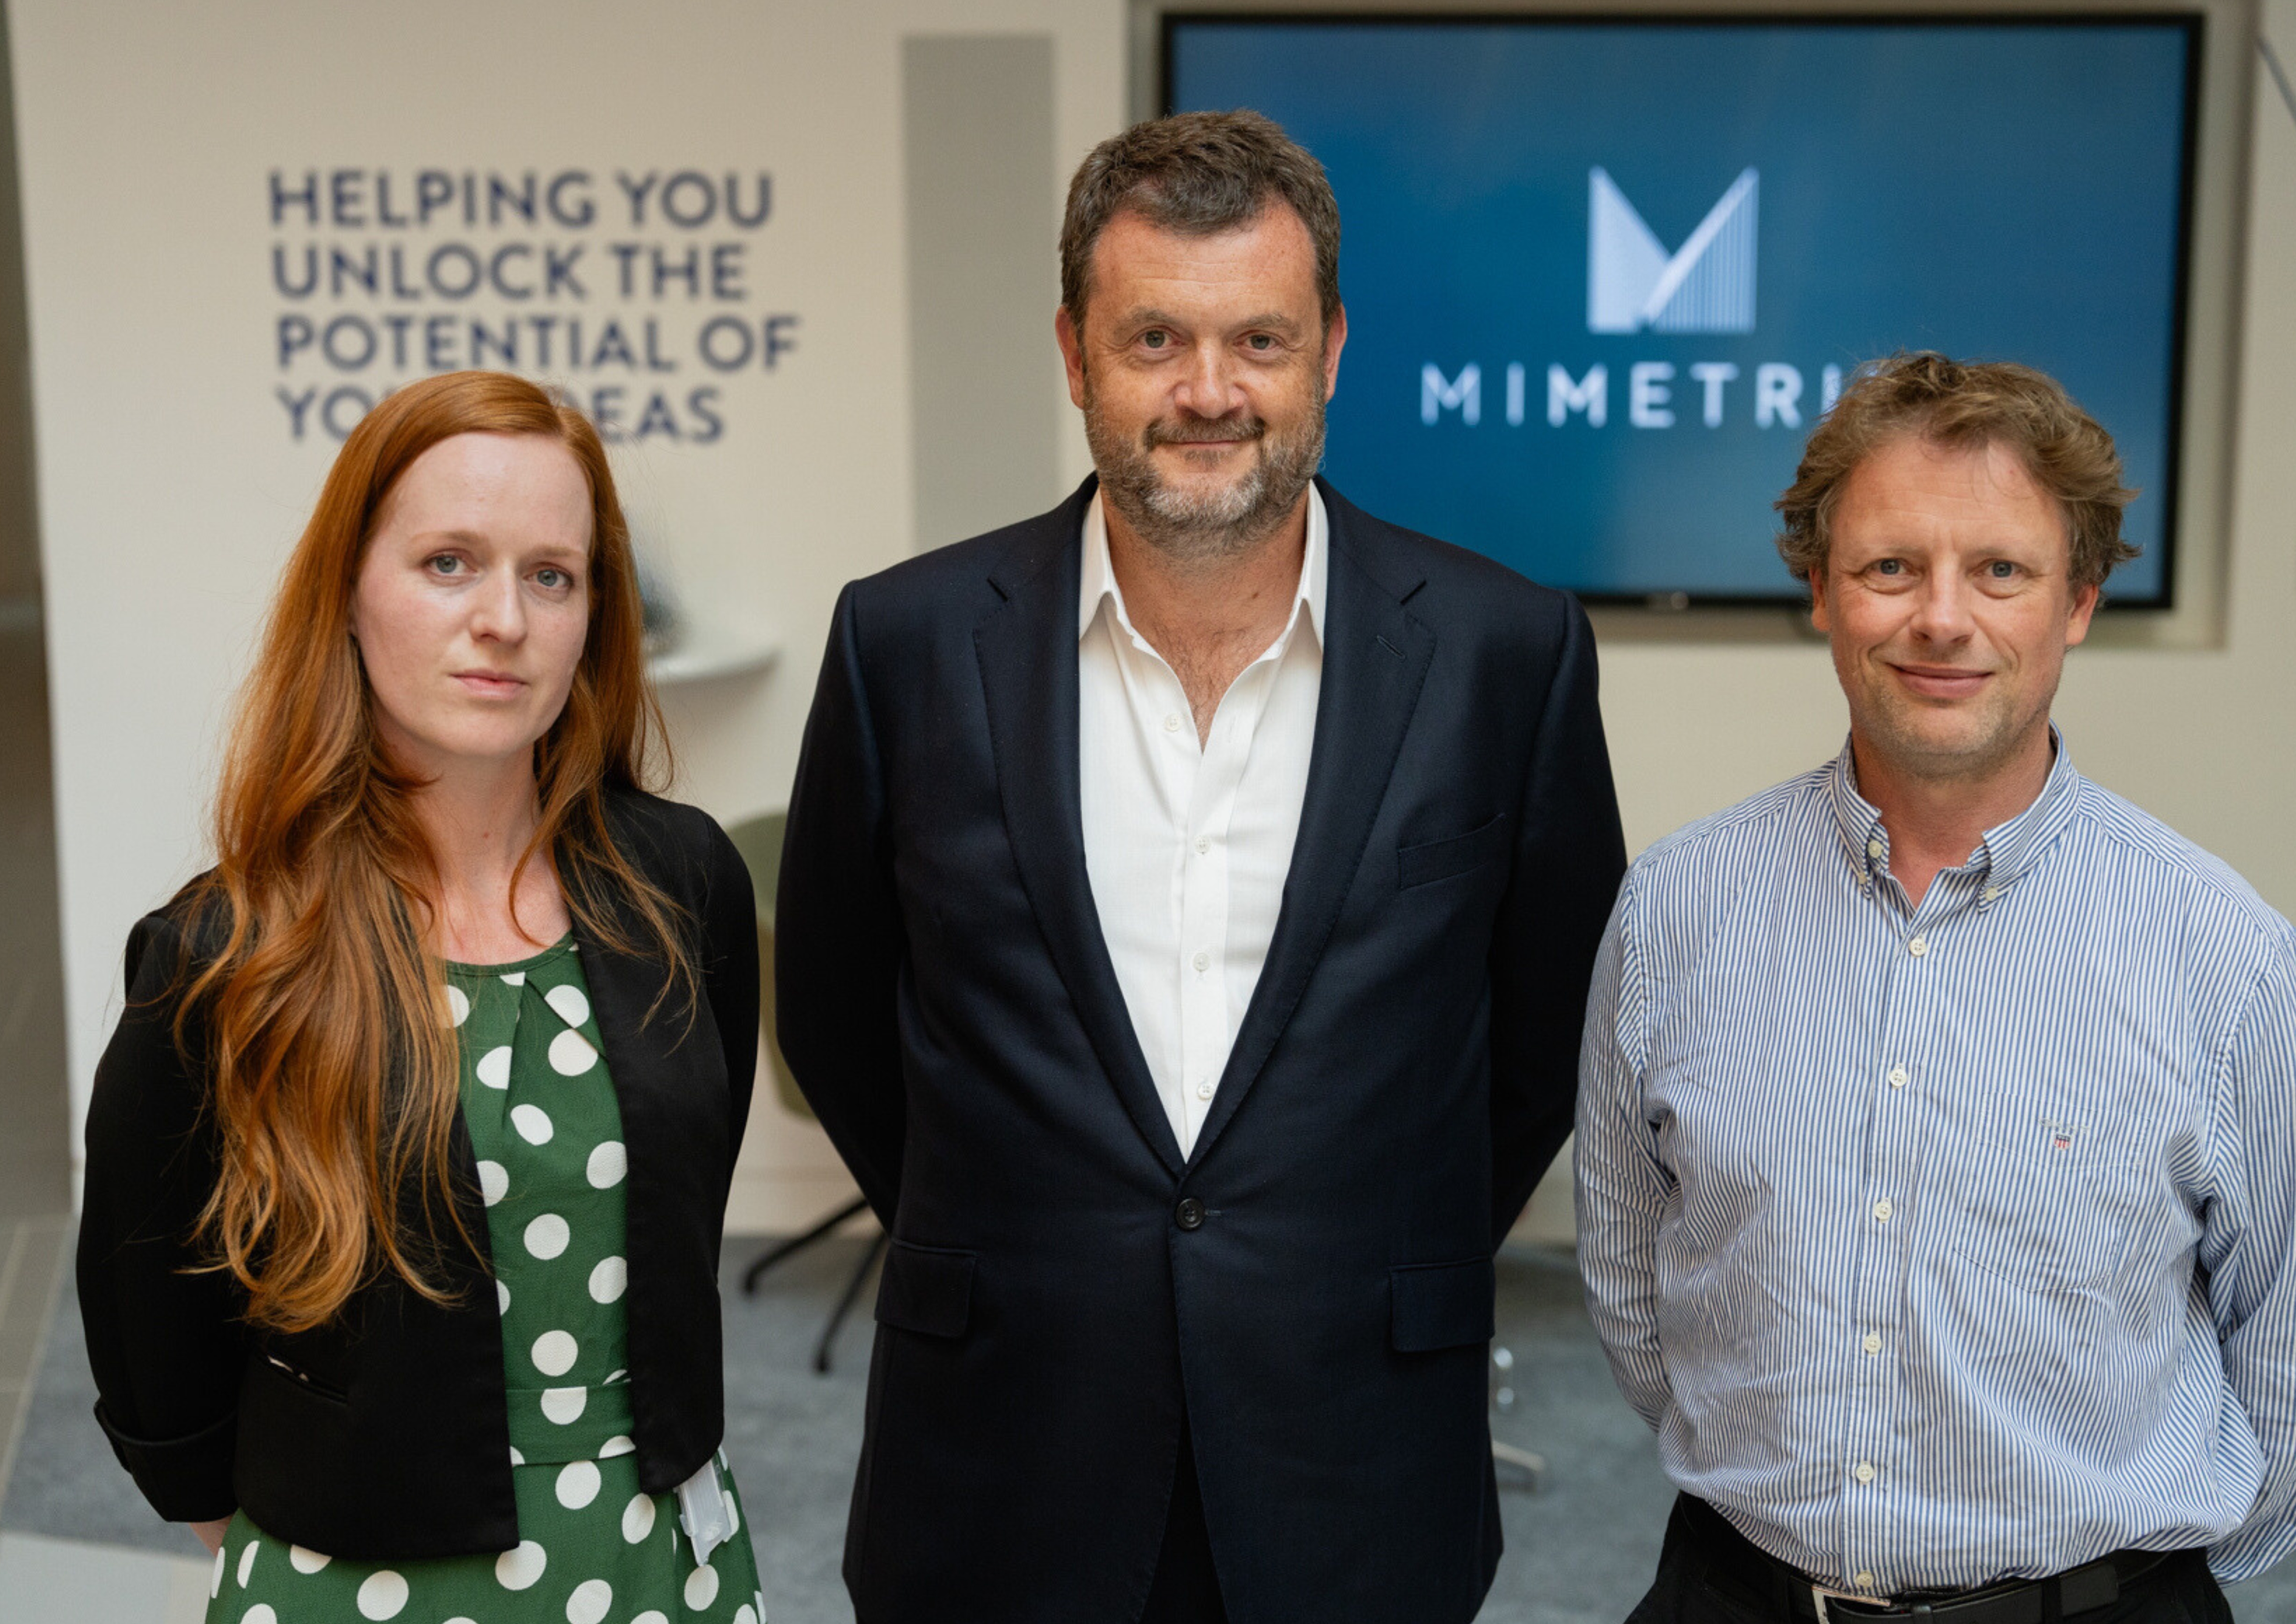 Founders of the company Mimetrik posing for the camera.